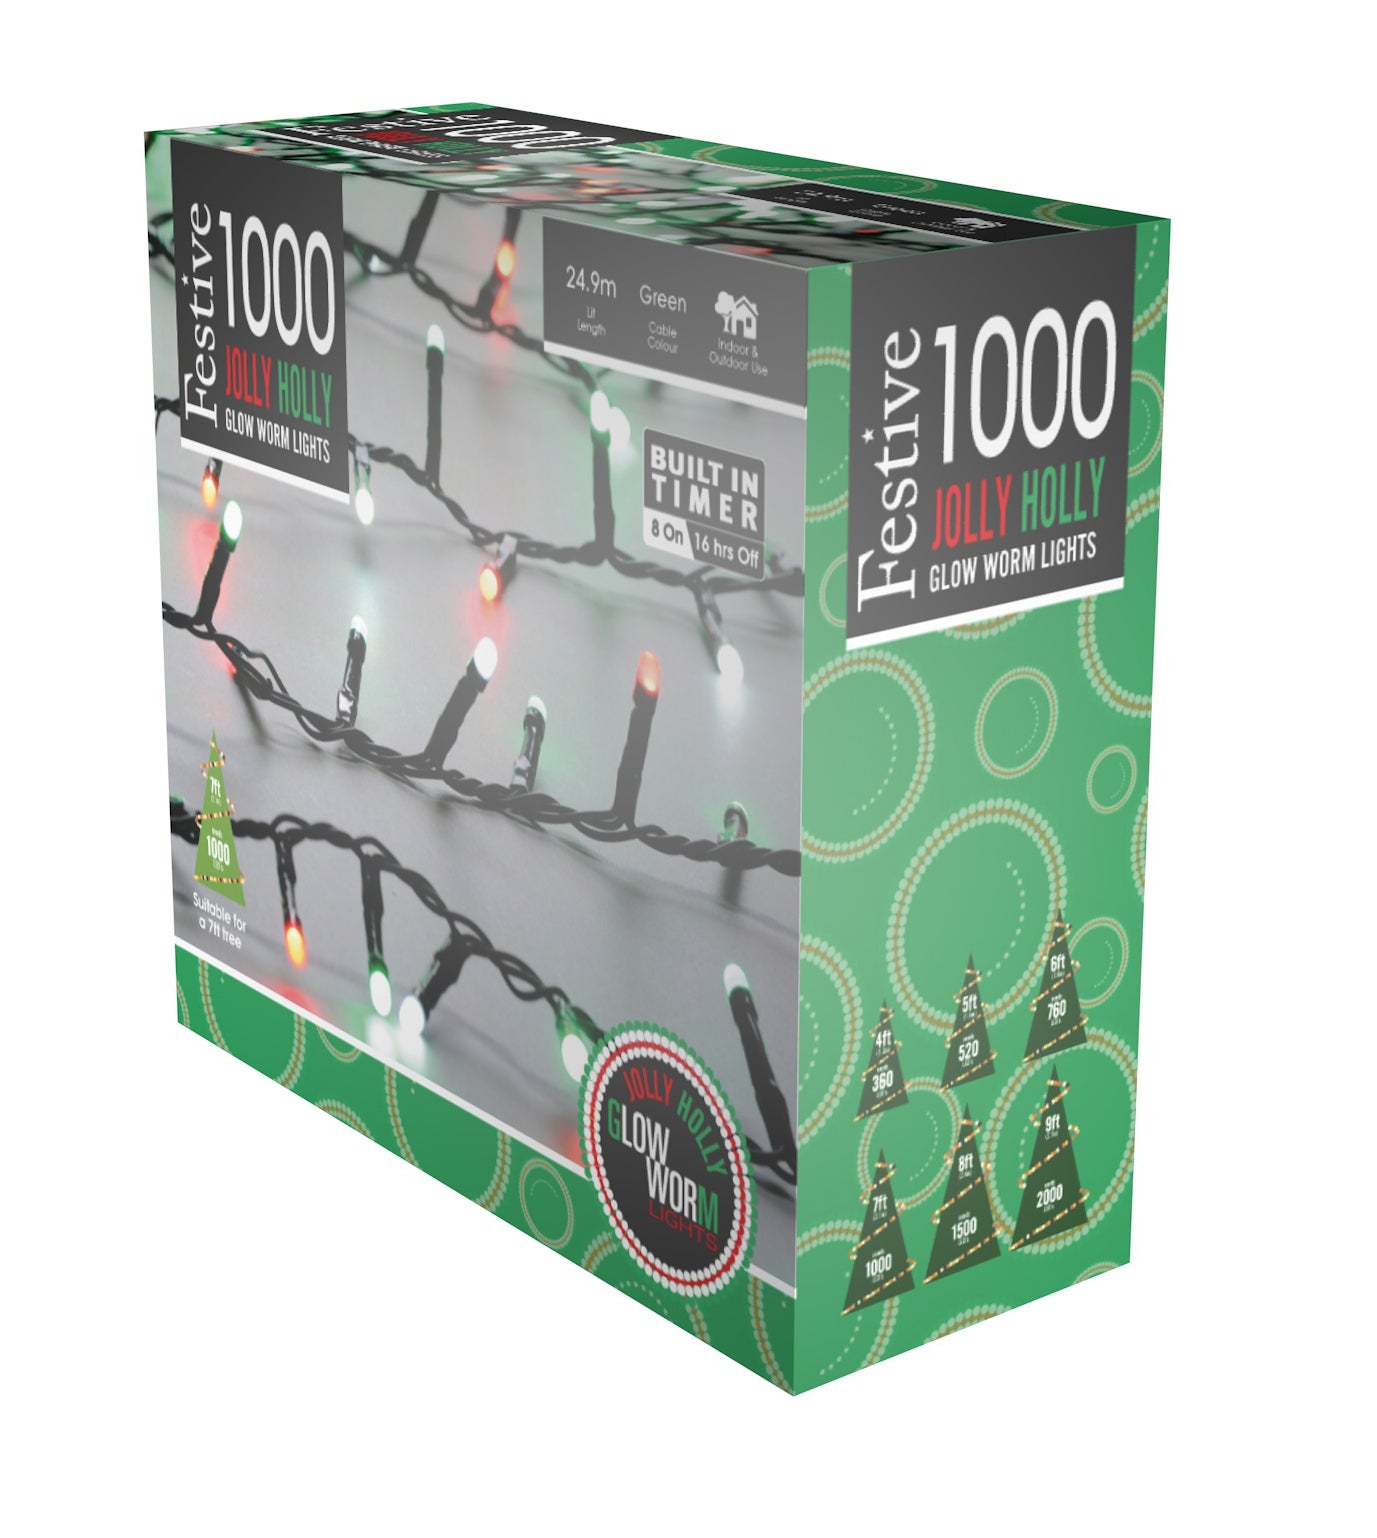 1000 Glow-Worm Jolly Holly Lights